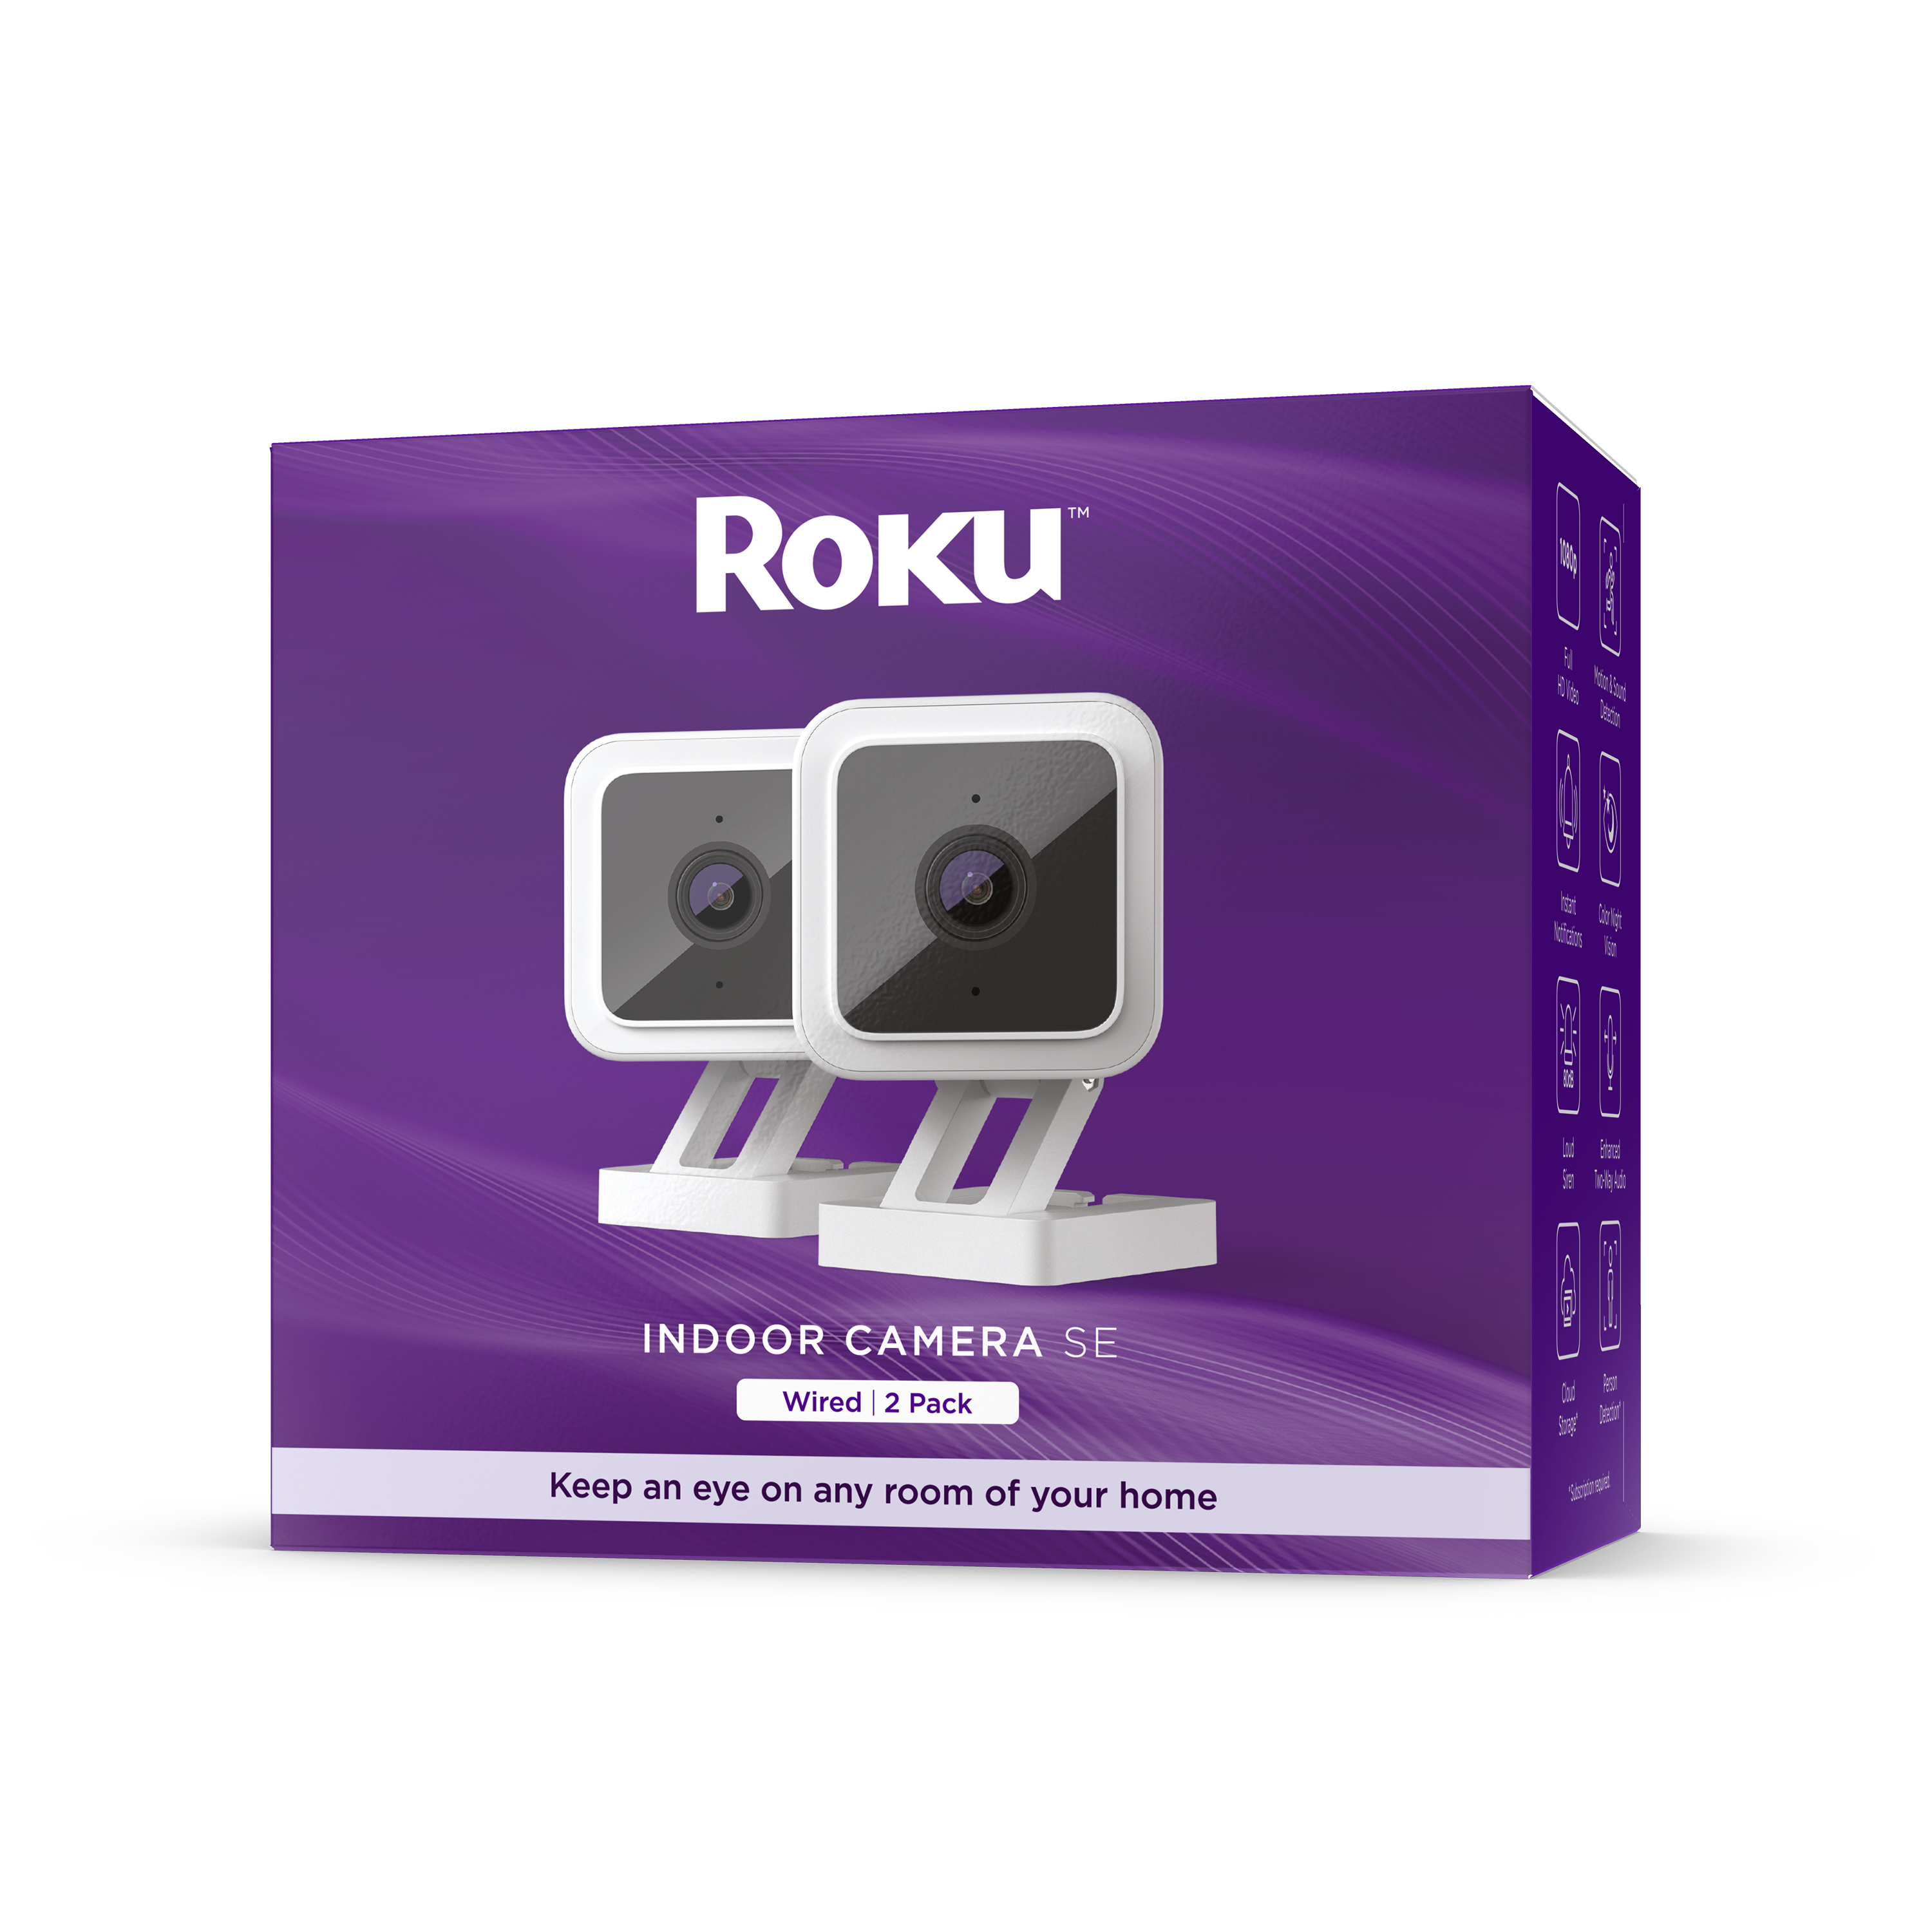 Roku Smart Home Indoor Camera SE (2-Pack) Wi-Fi-Connected - Wired Security Surveillance Camera with Motion & Sound Detection - image 1 of 9